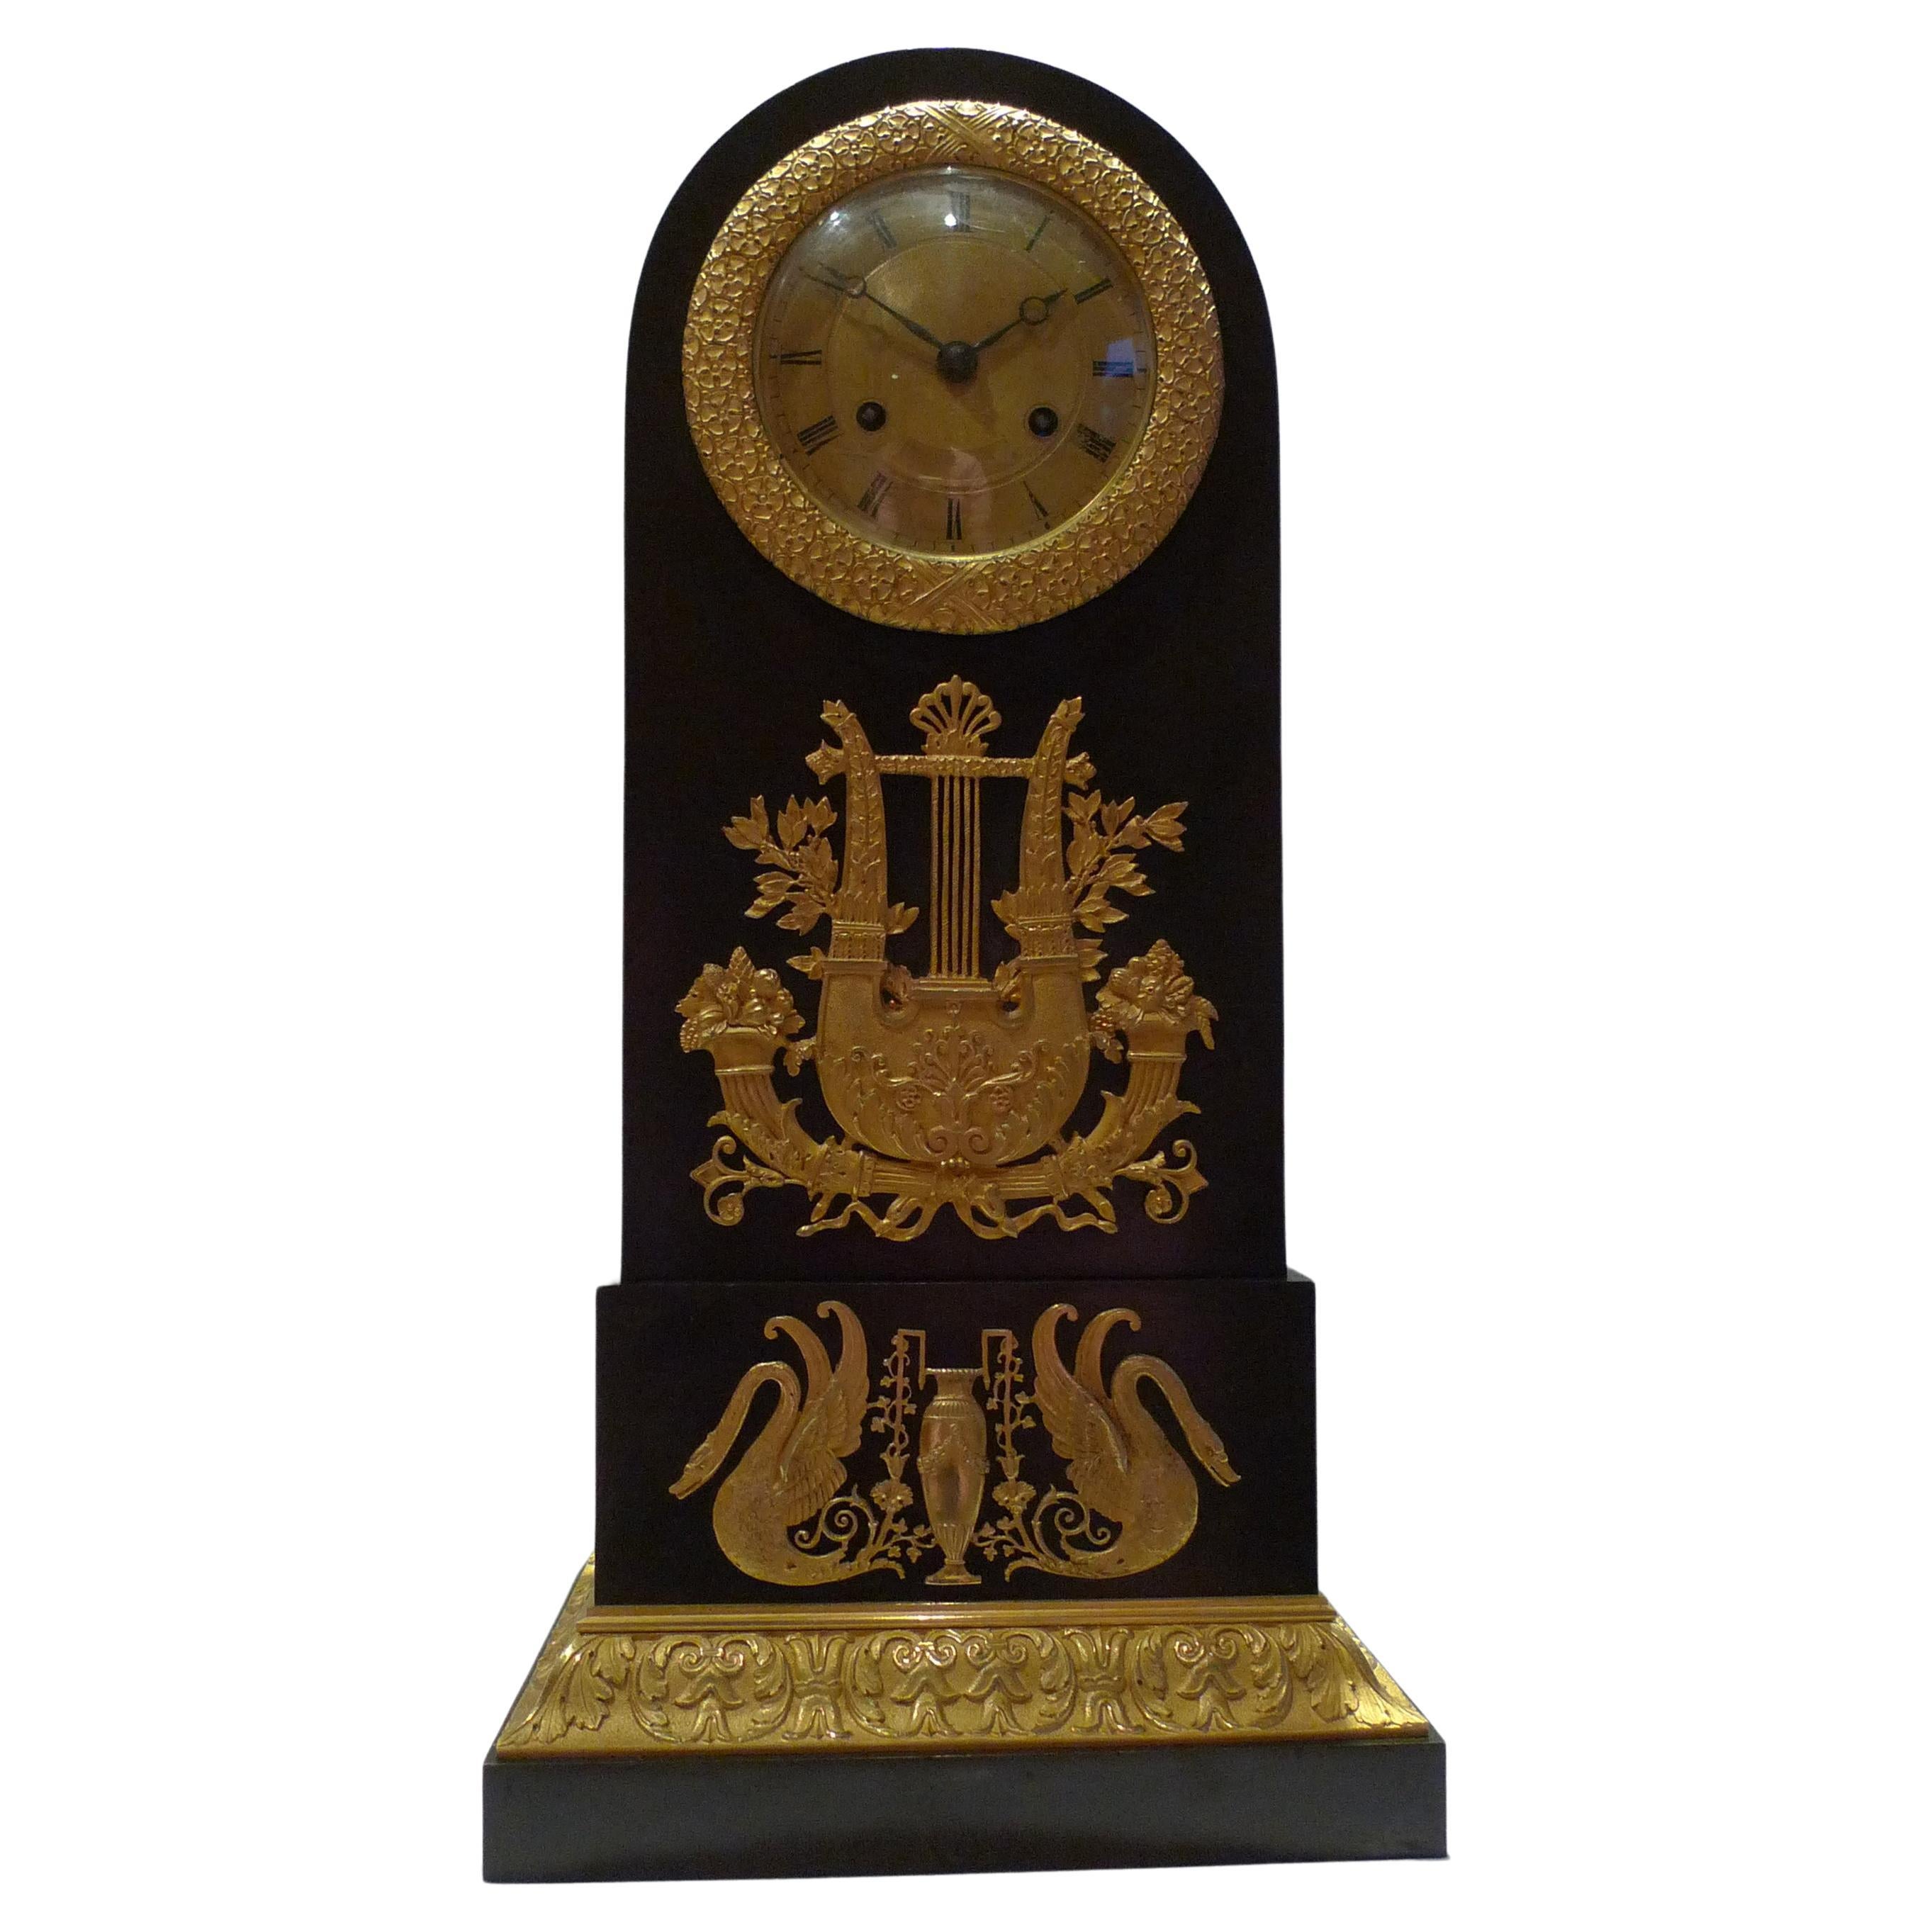 French Mantel Clock of Empire Period of "Borne" Form